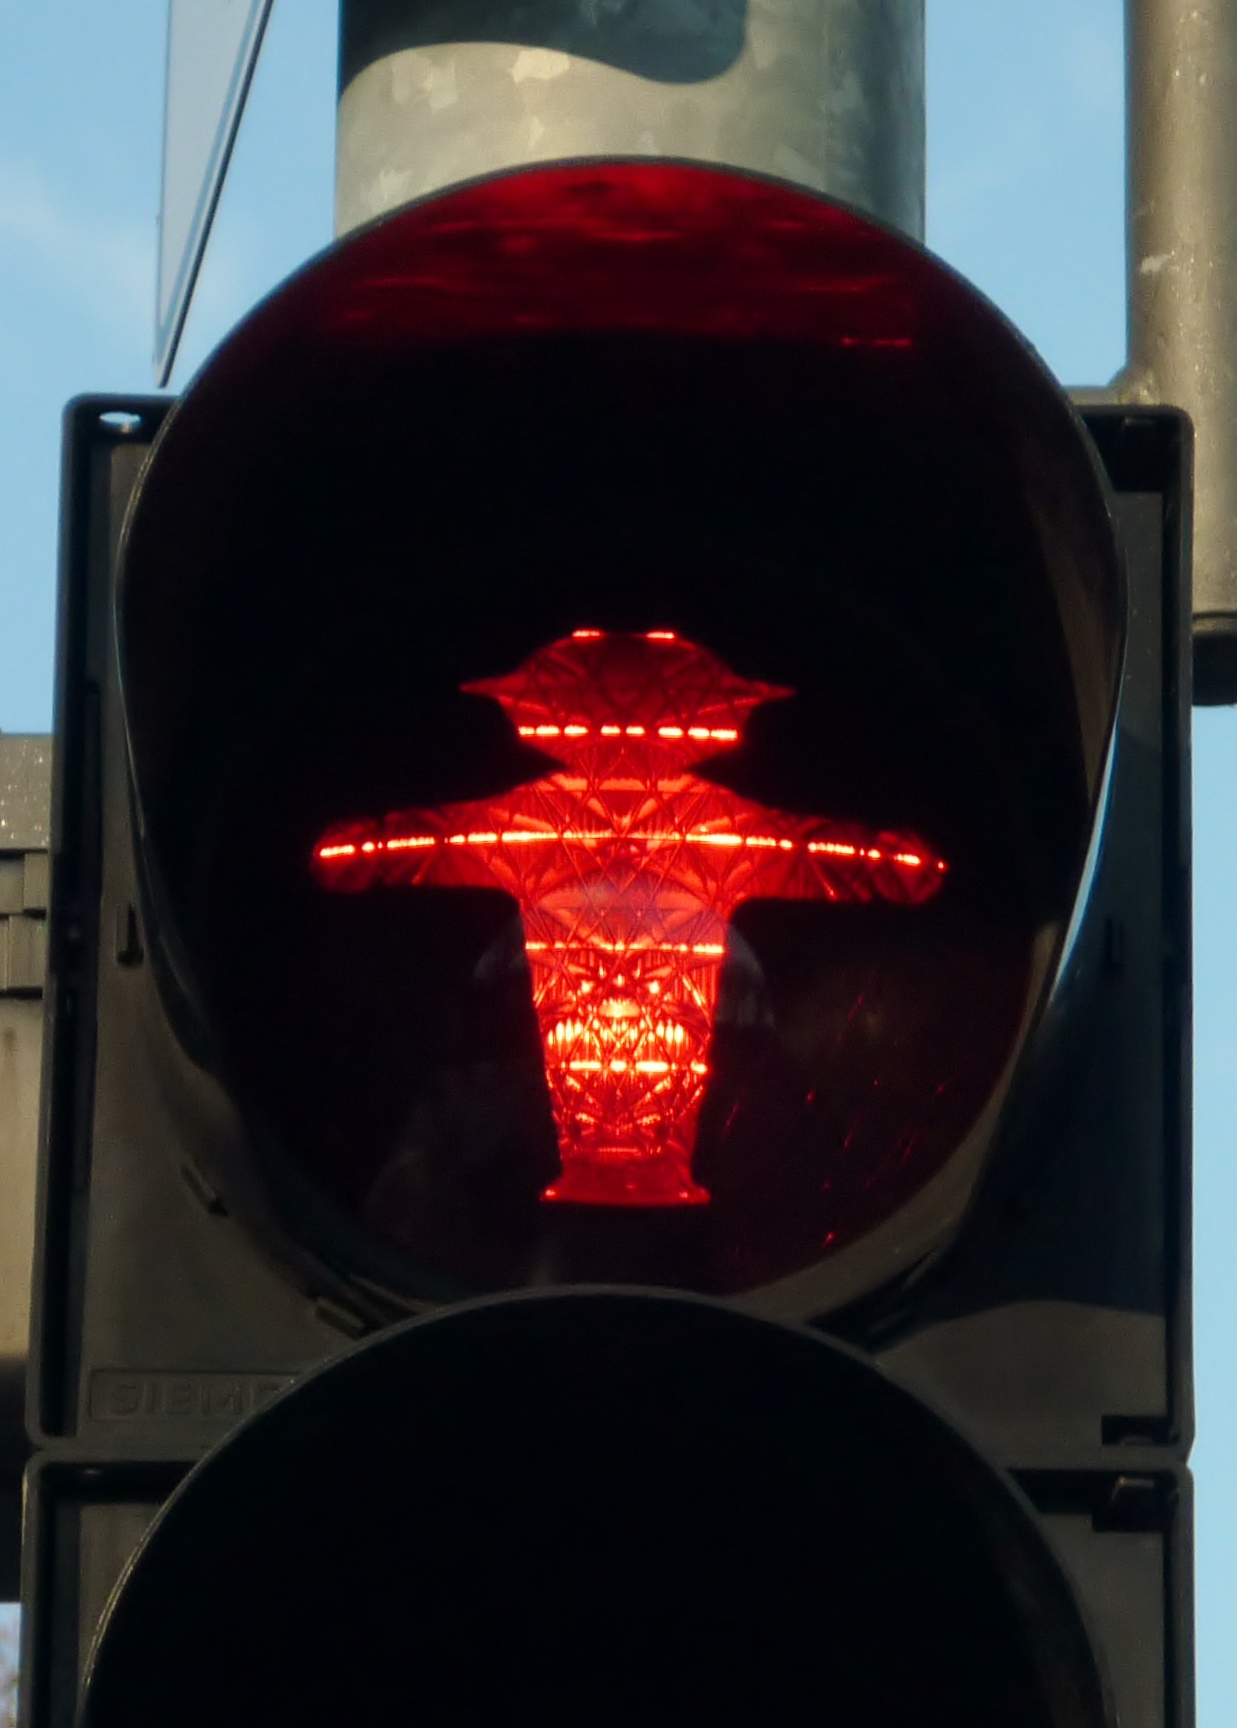 a traffic light with a red cross on it